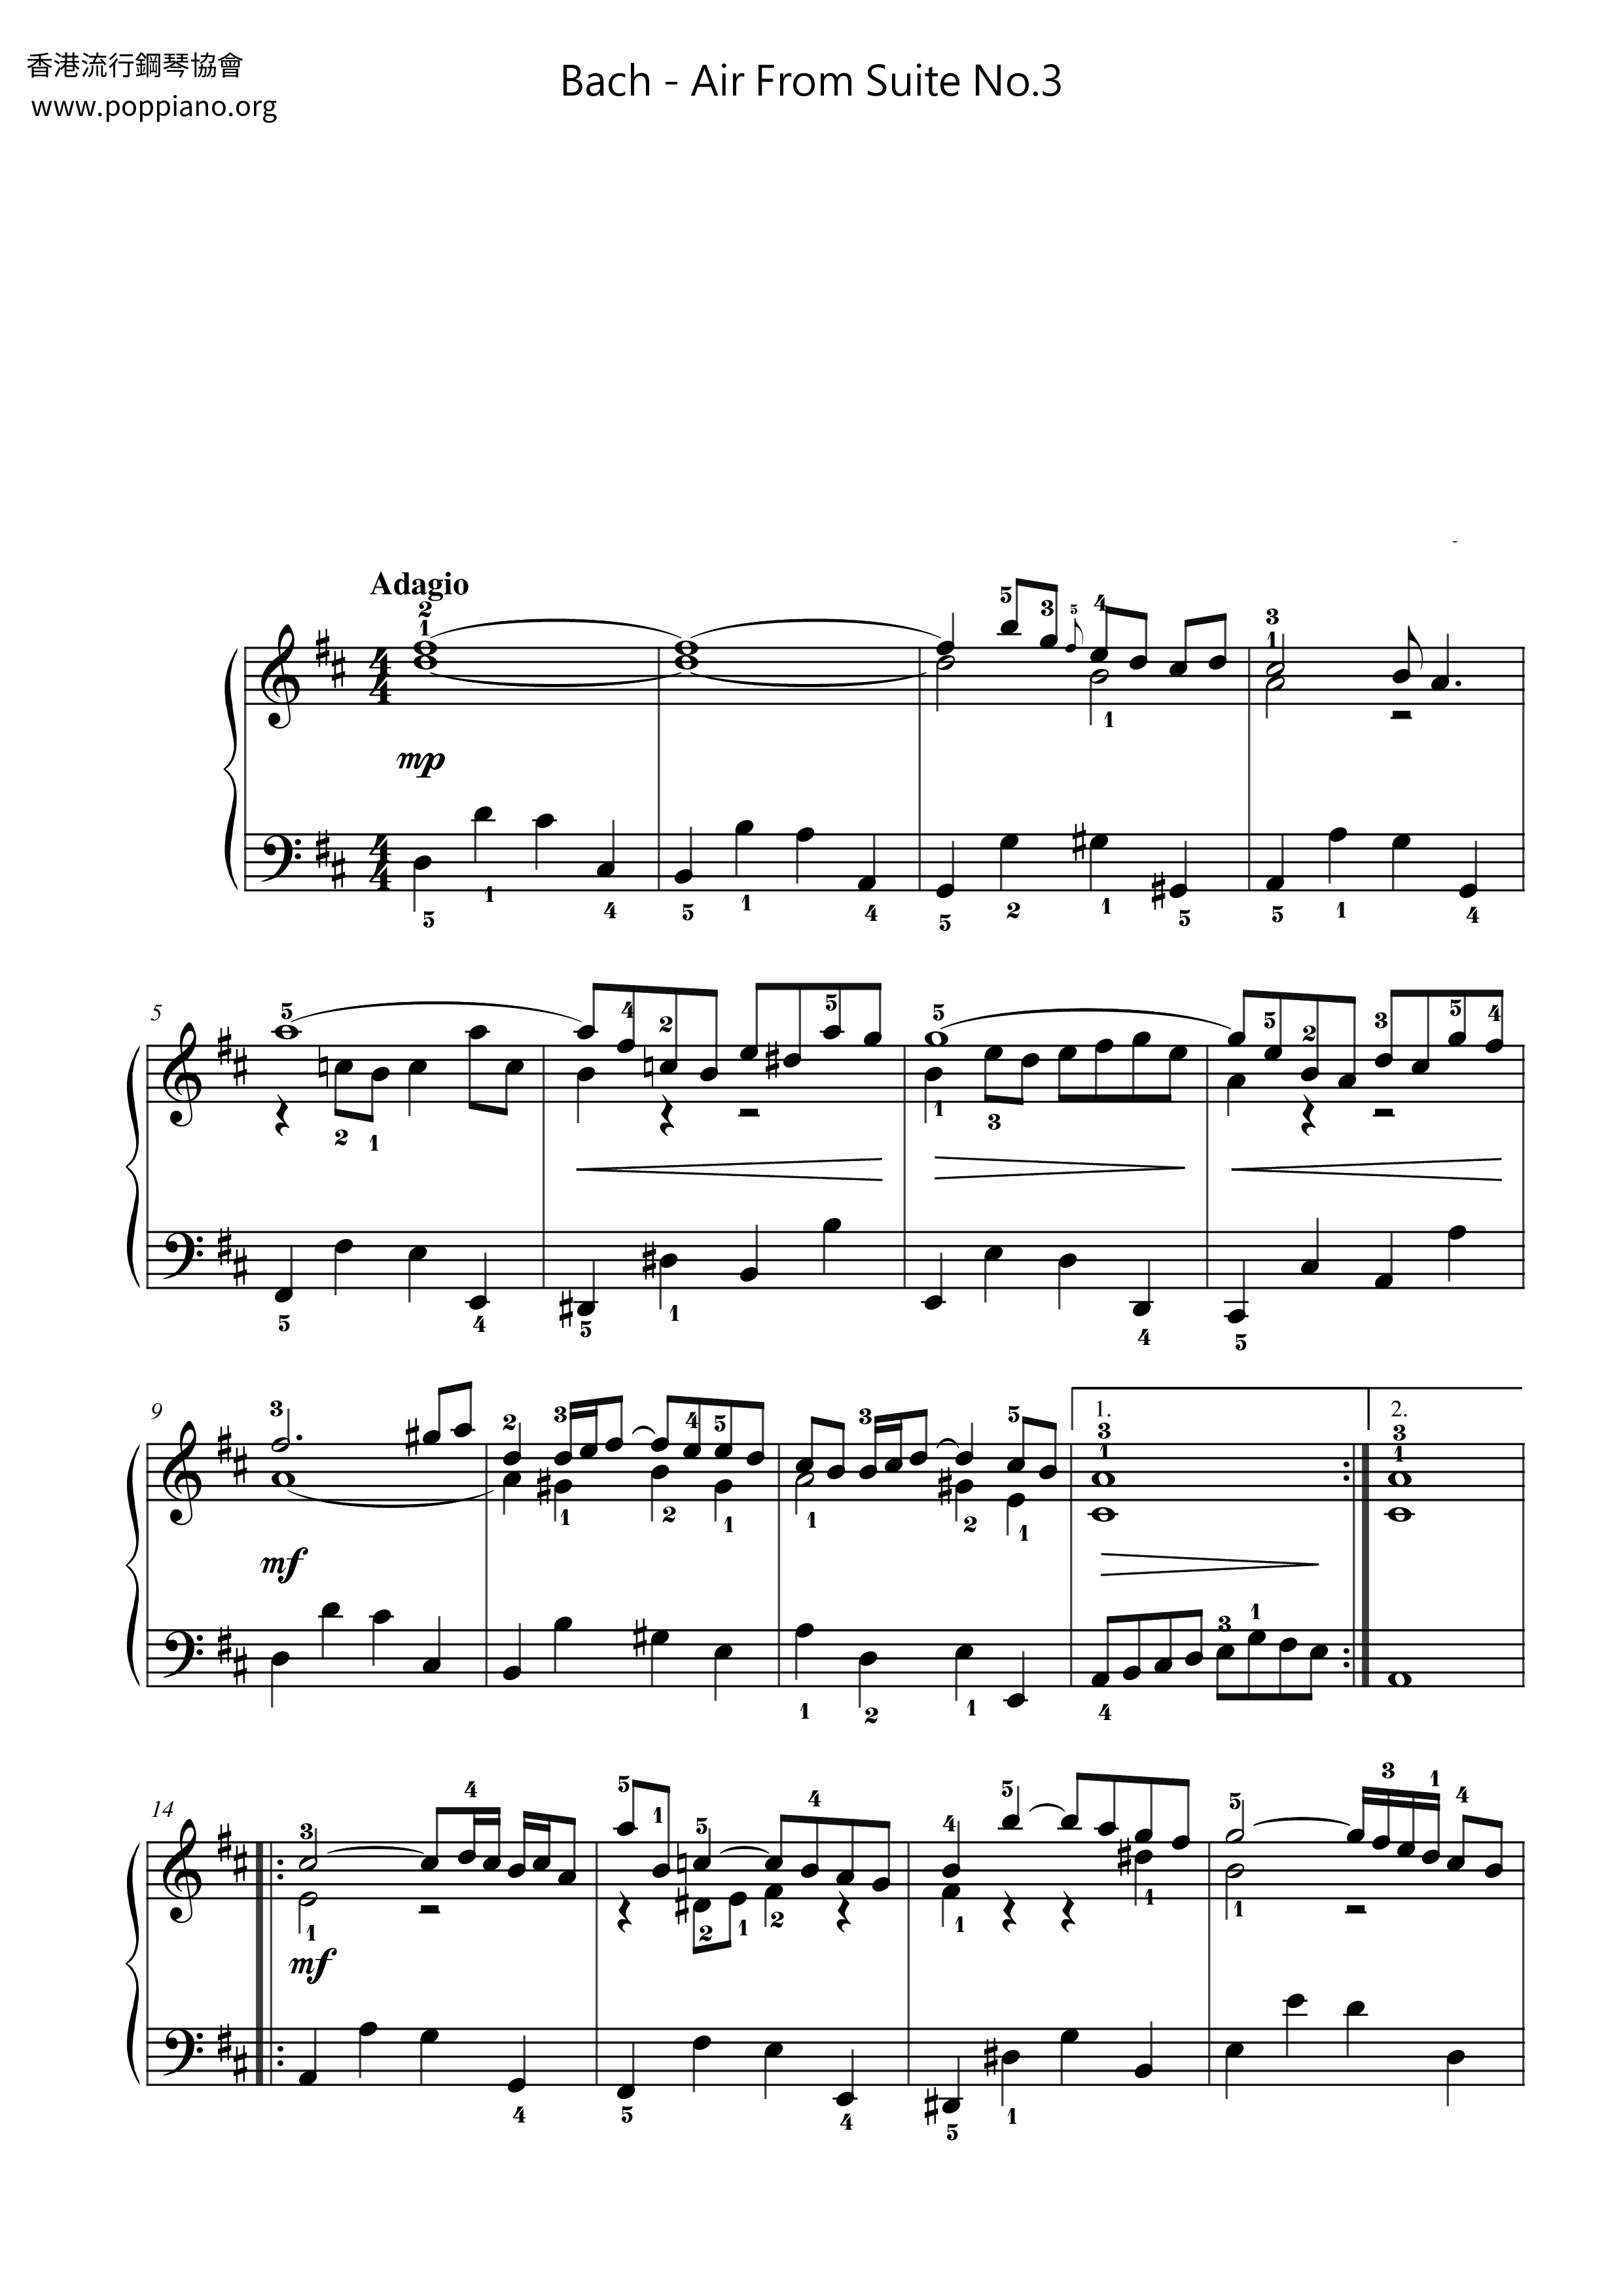 Air From Suite No.3  Score